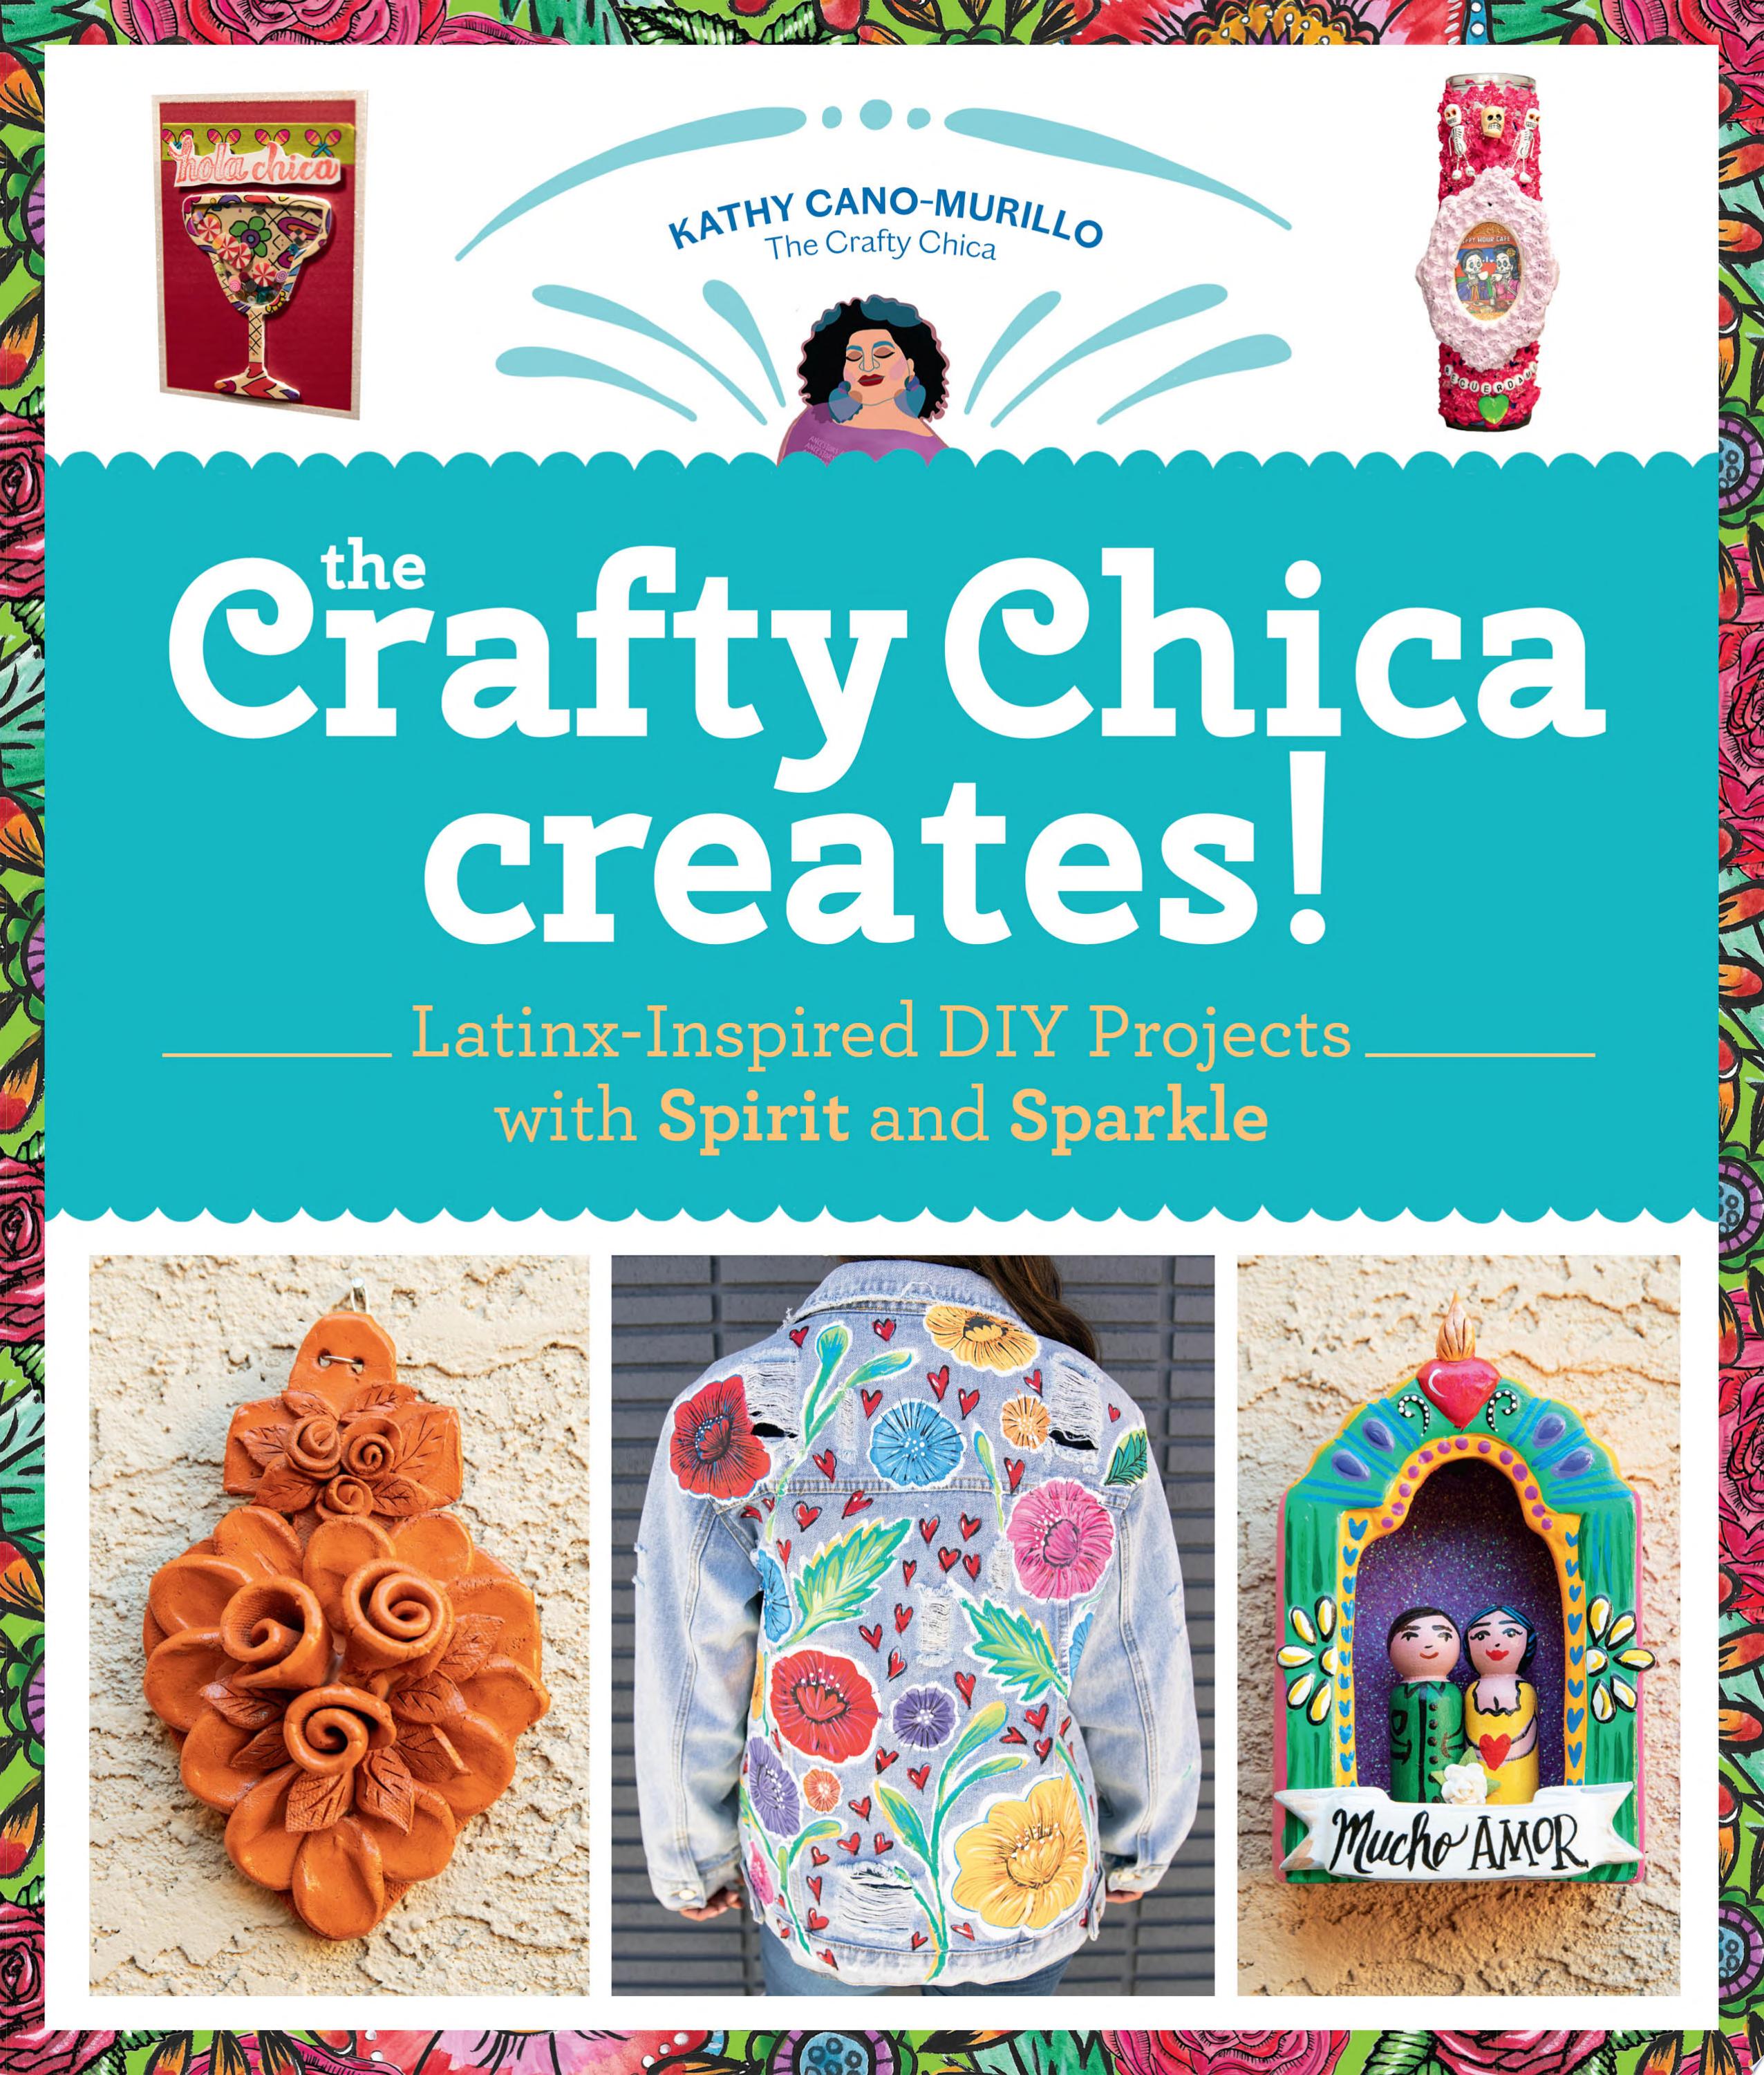 Image for "The Crafty Chica Creates!"